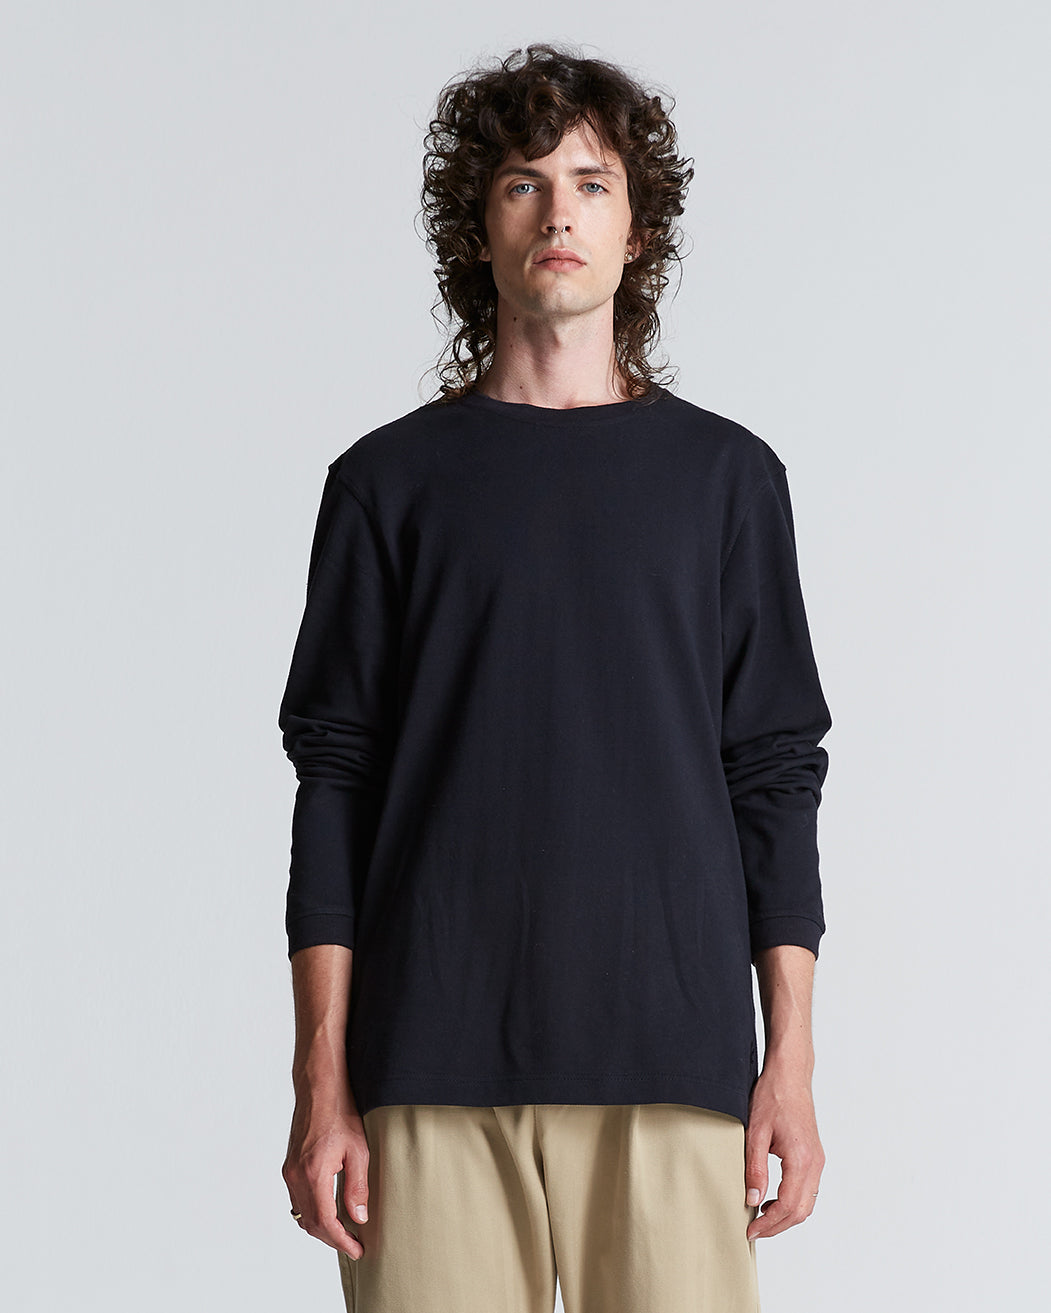 Cotton Long Sleeve Pique Tee in Black Beauty